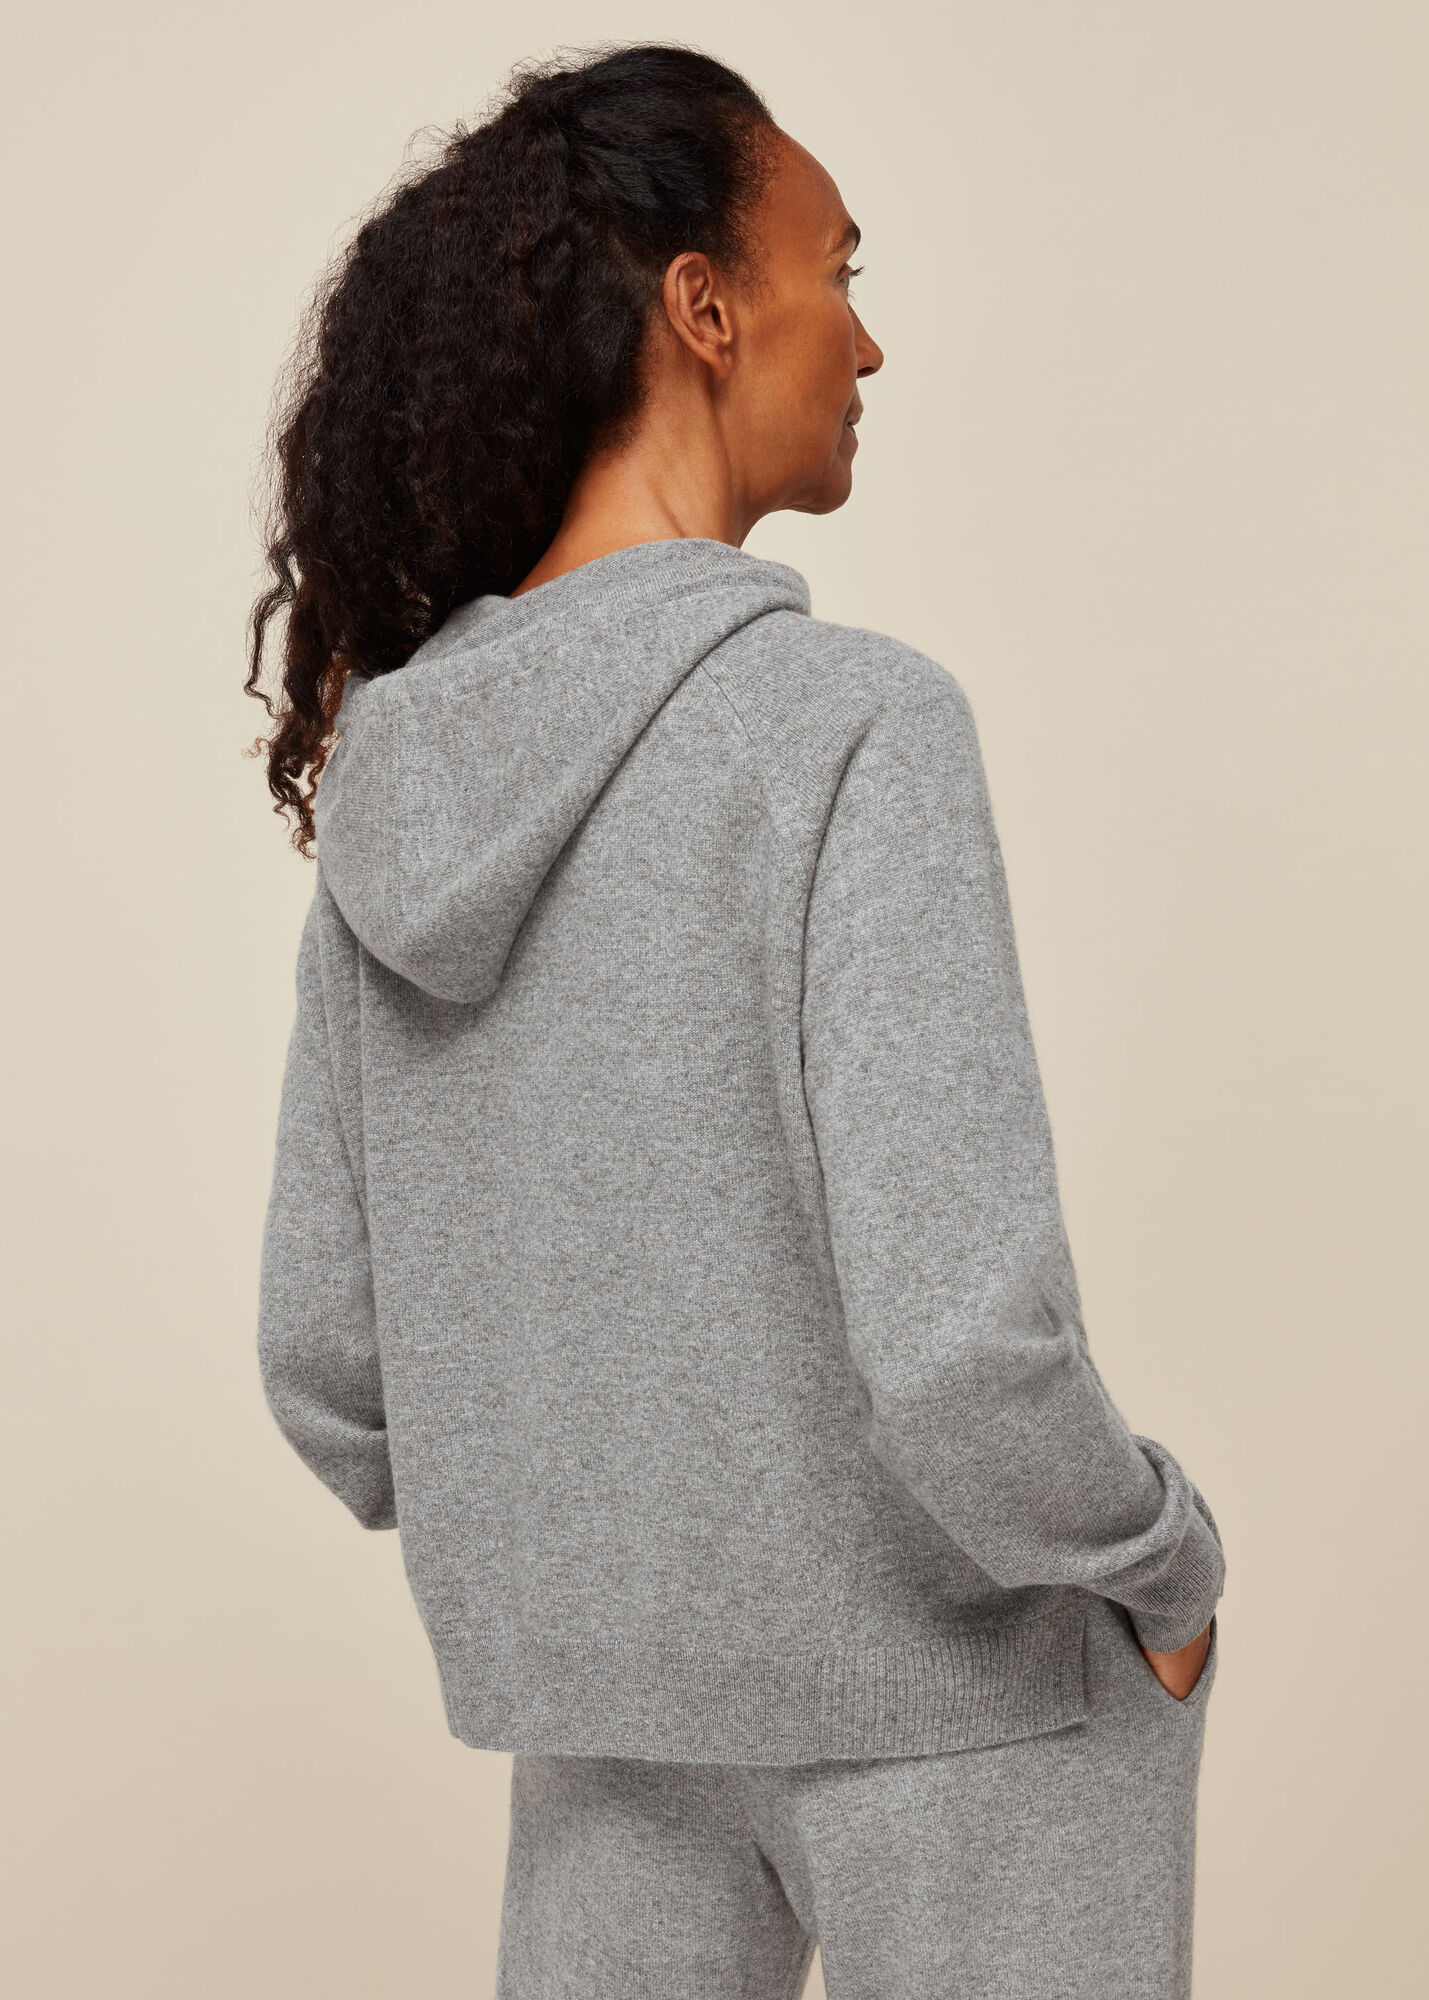 Grey Marl Cashmere Hooded Knit | WHISTLES